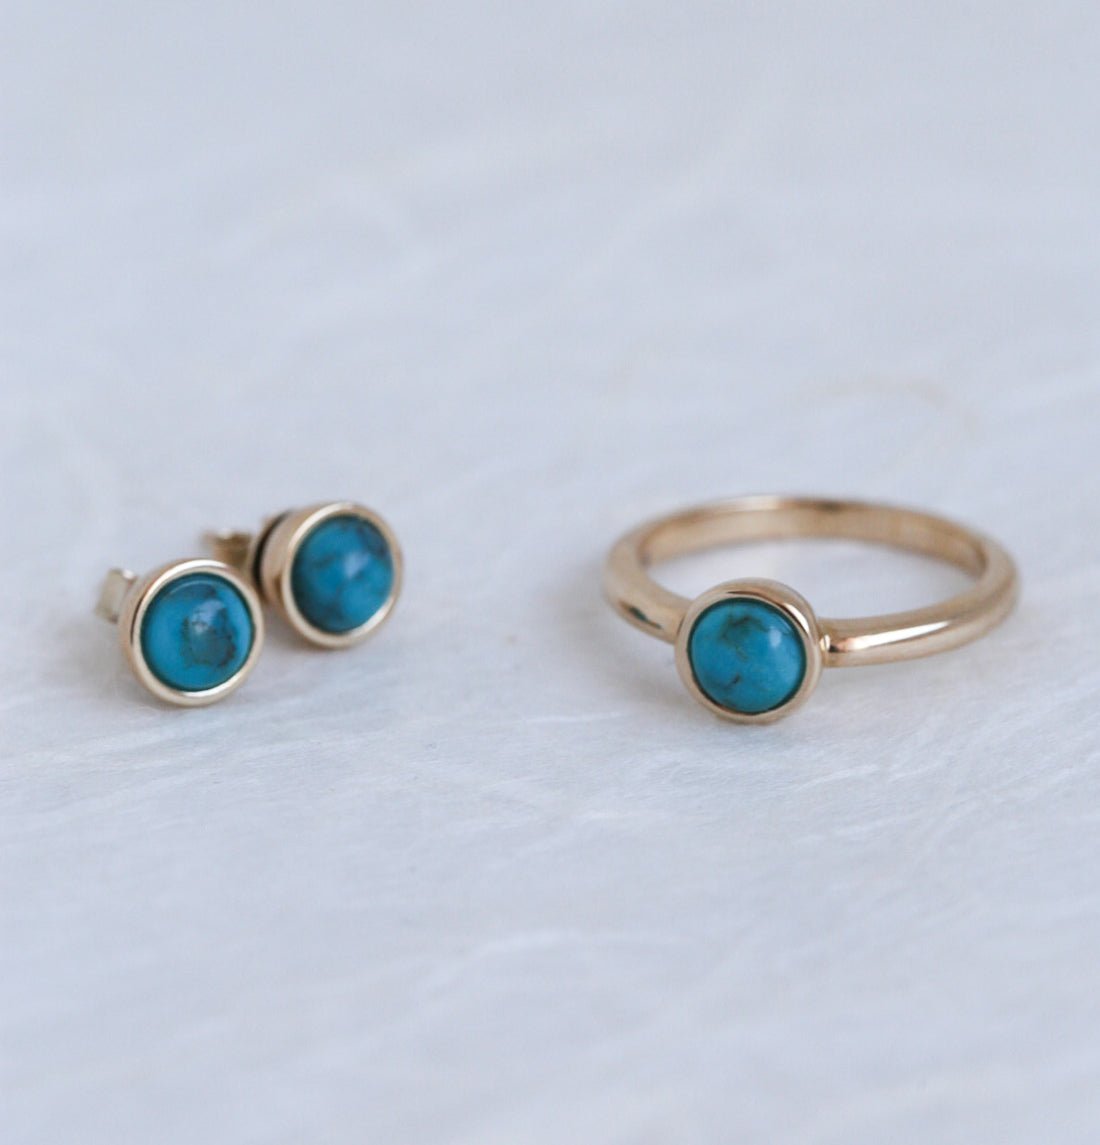 Turquoise Ring - Limited Edition